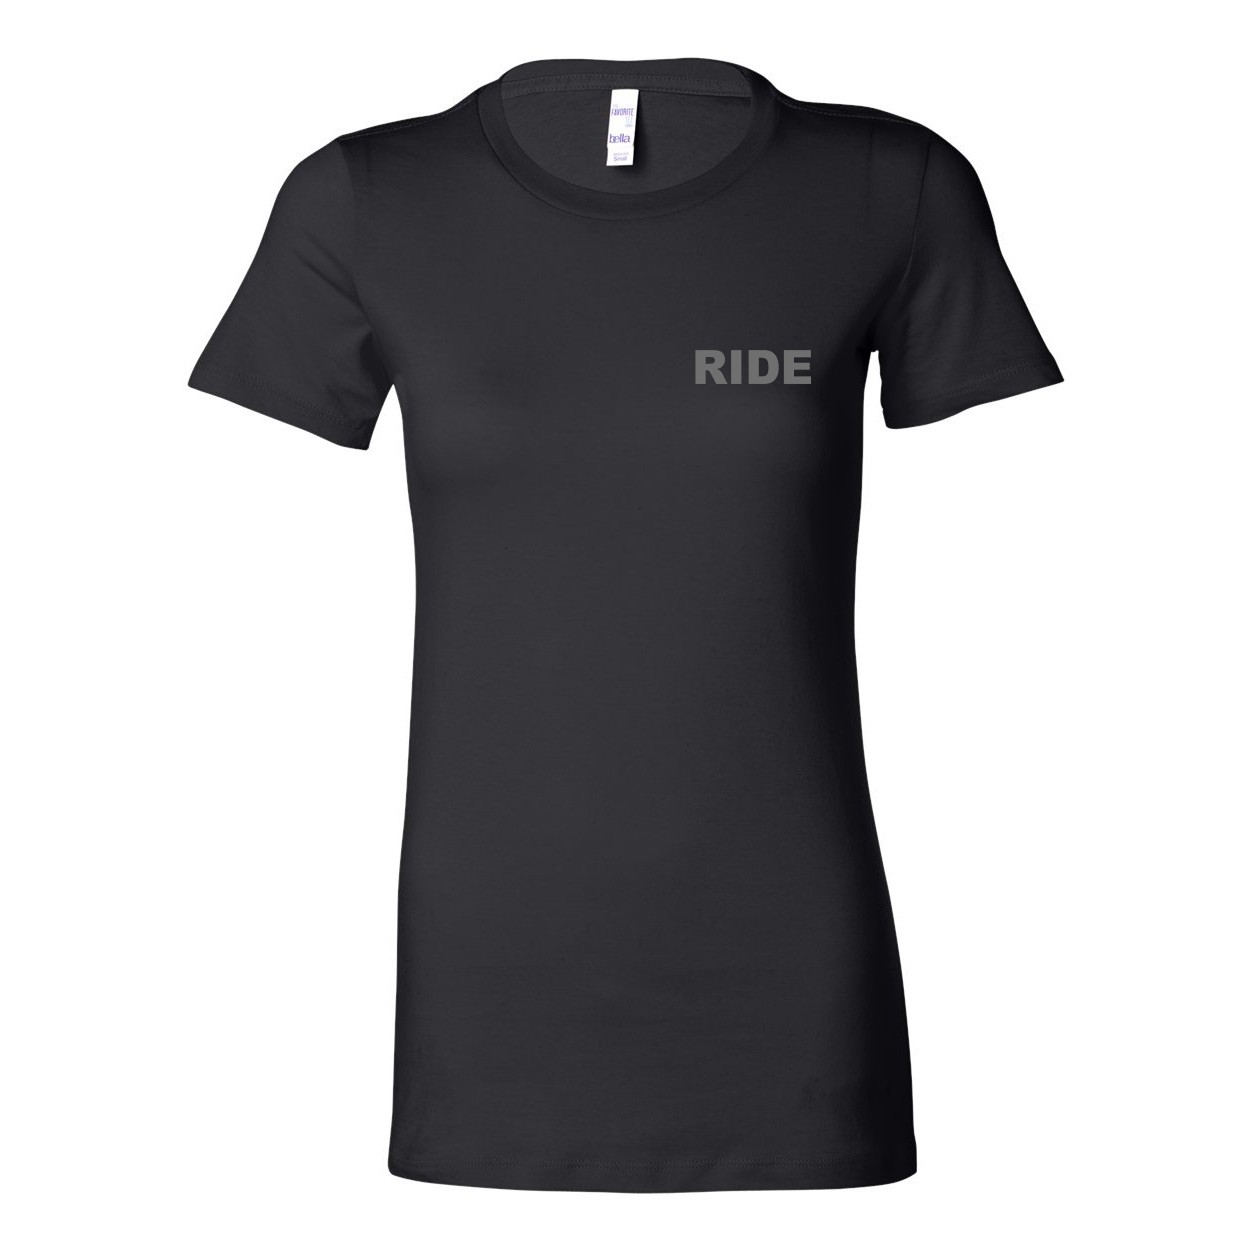 Ride Brand Logo Women's Night Out Fitted Tri-Blend T-Shirt Black (Gray Logo)